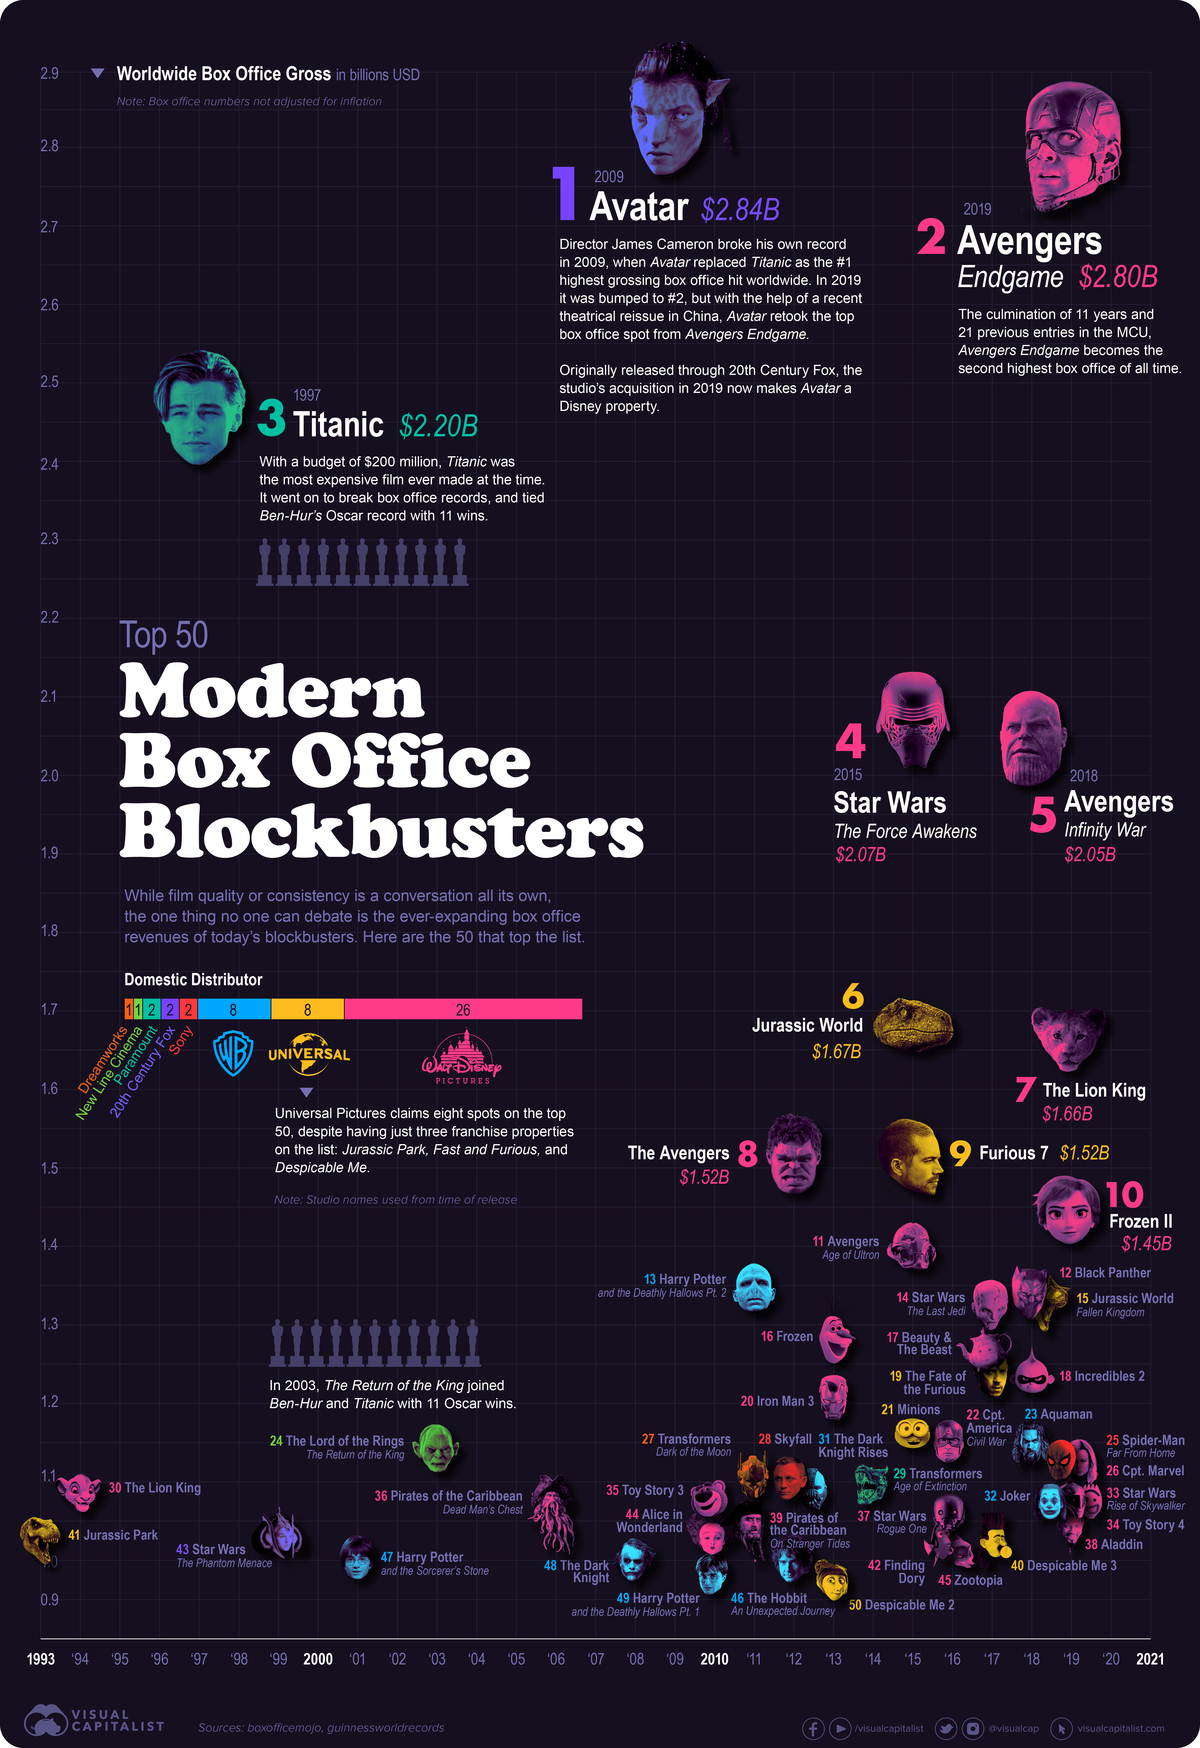 Box Office Blockbusters: The Top Grossing Movies in the Last 30 Years